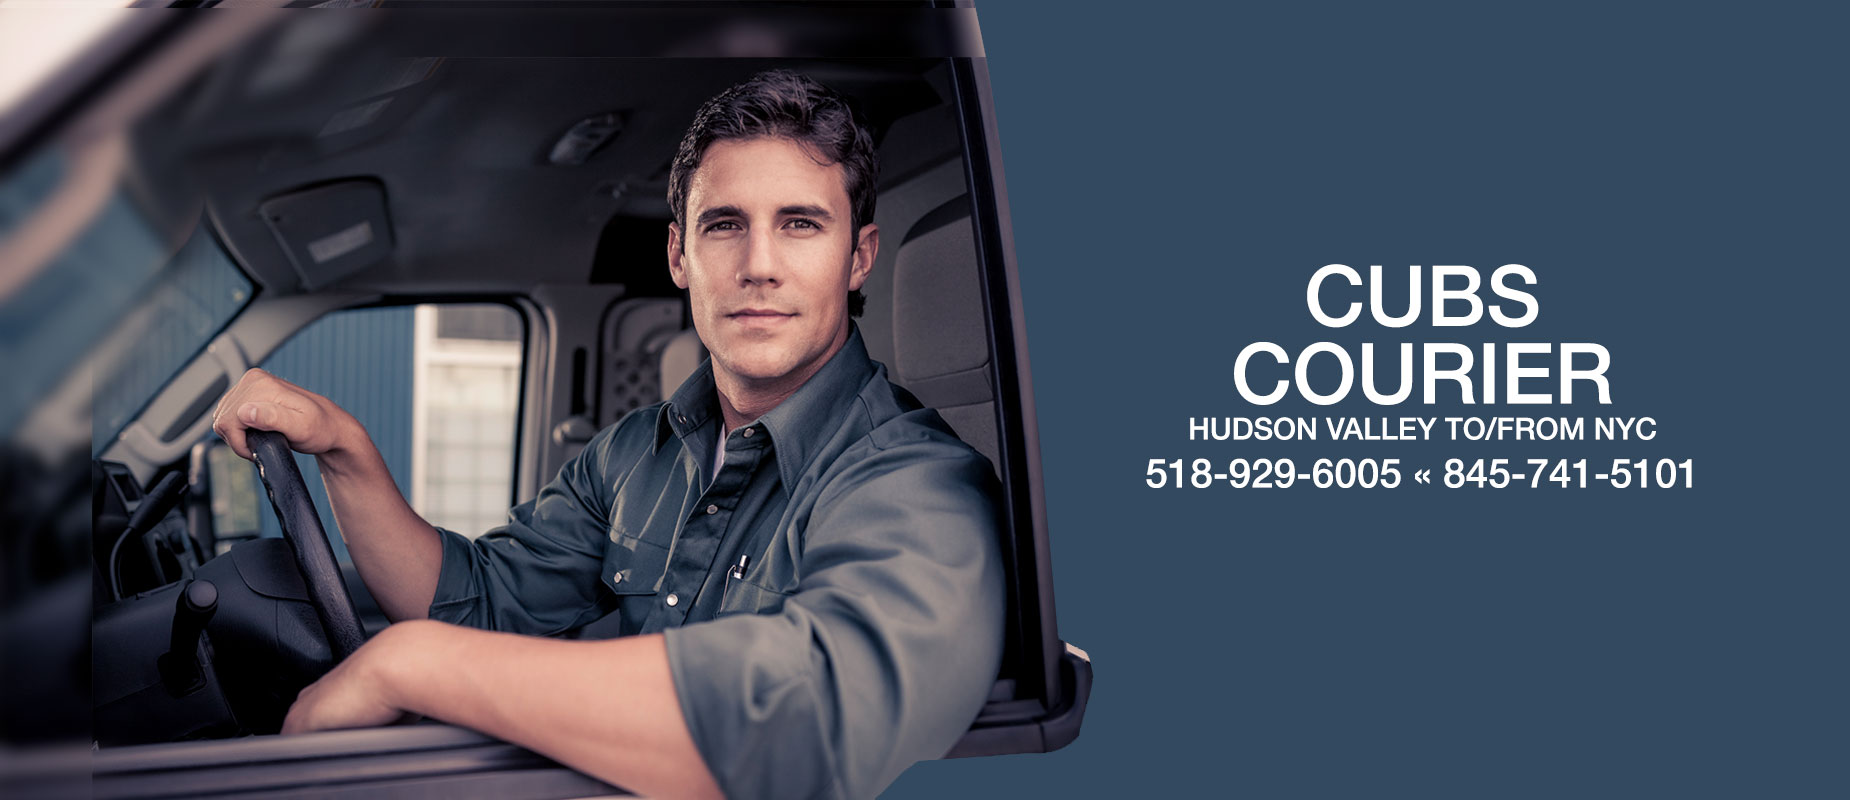 Contact Cubs Courier